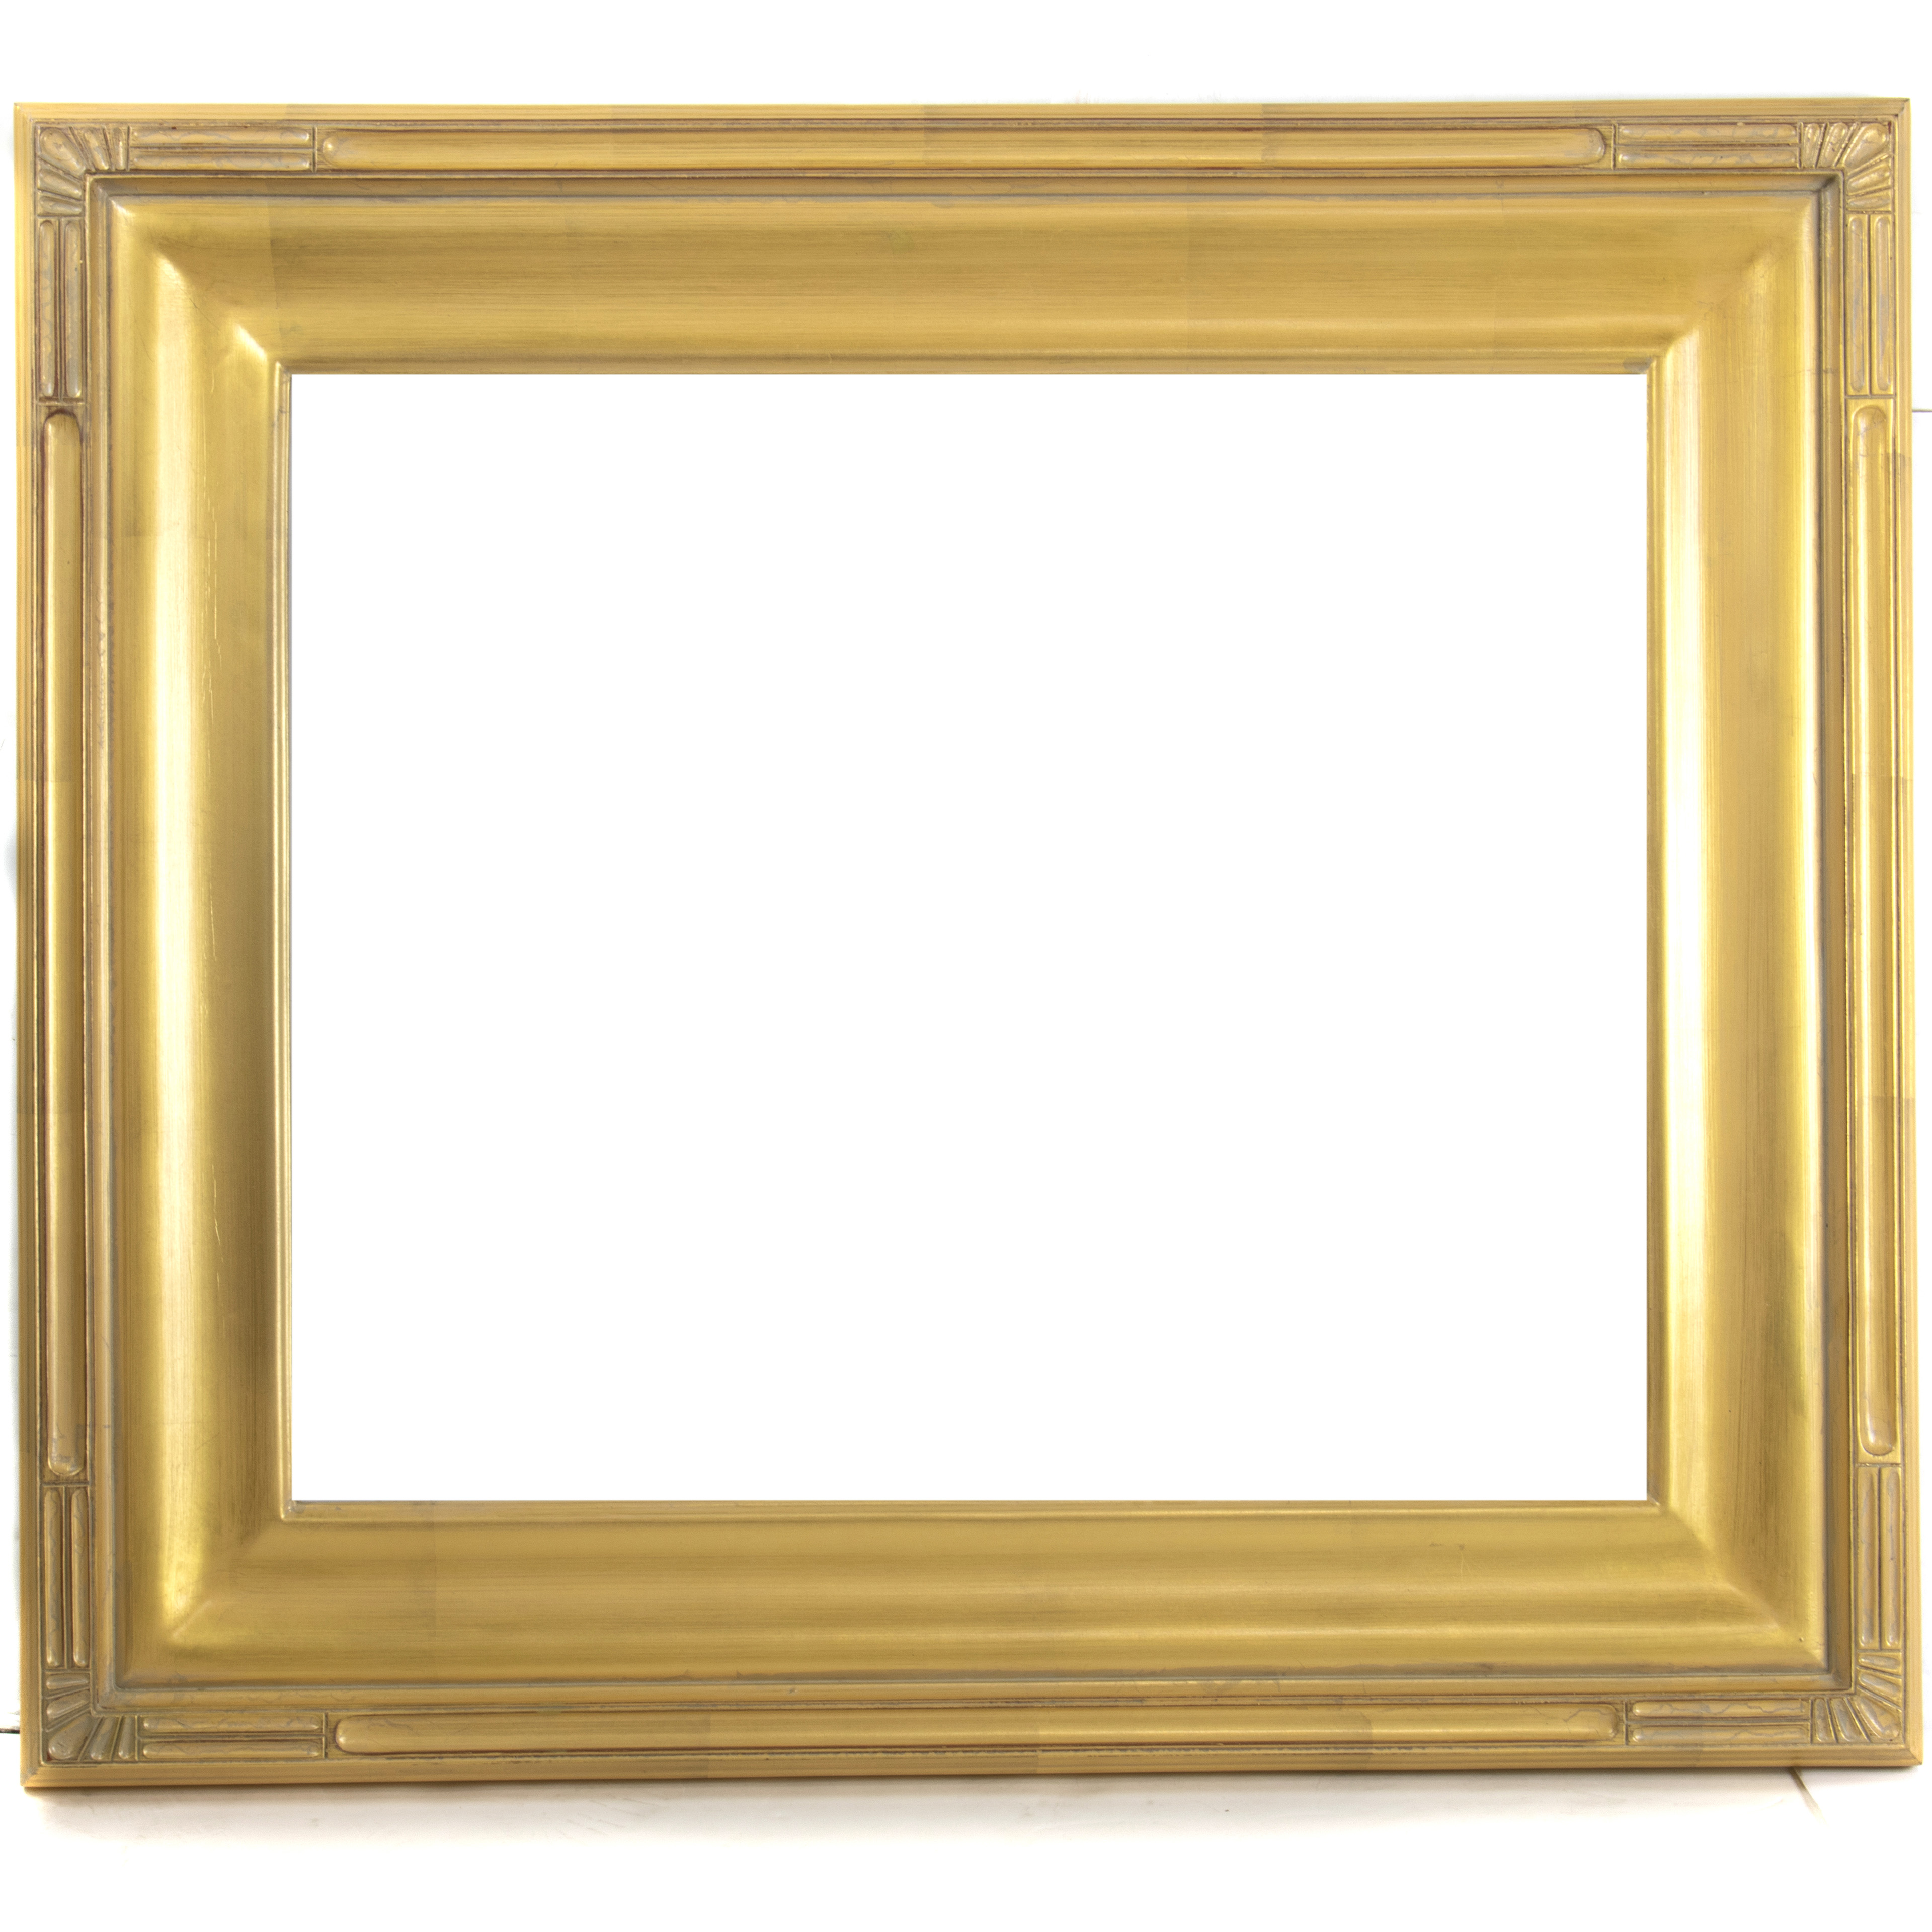 ARTS AND CRAFTS STYLE FRAME Arts